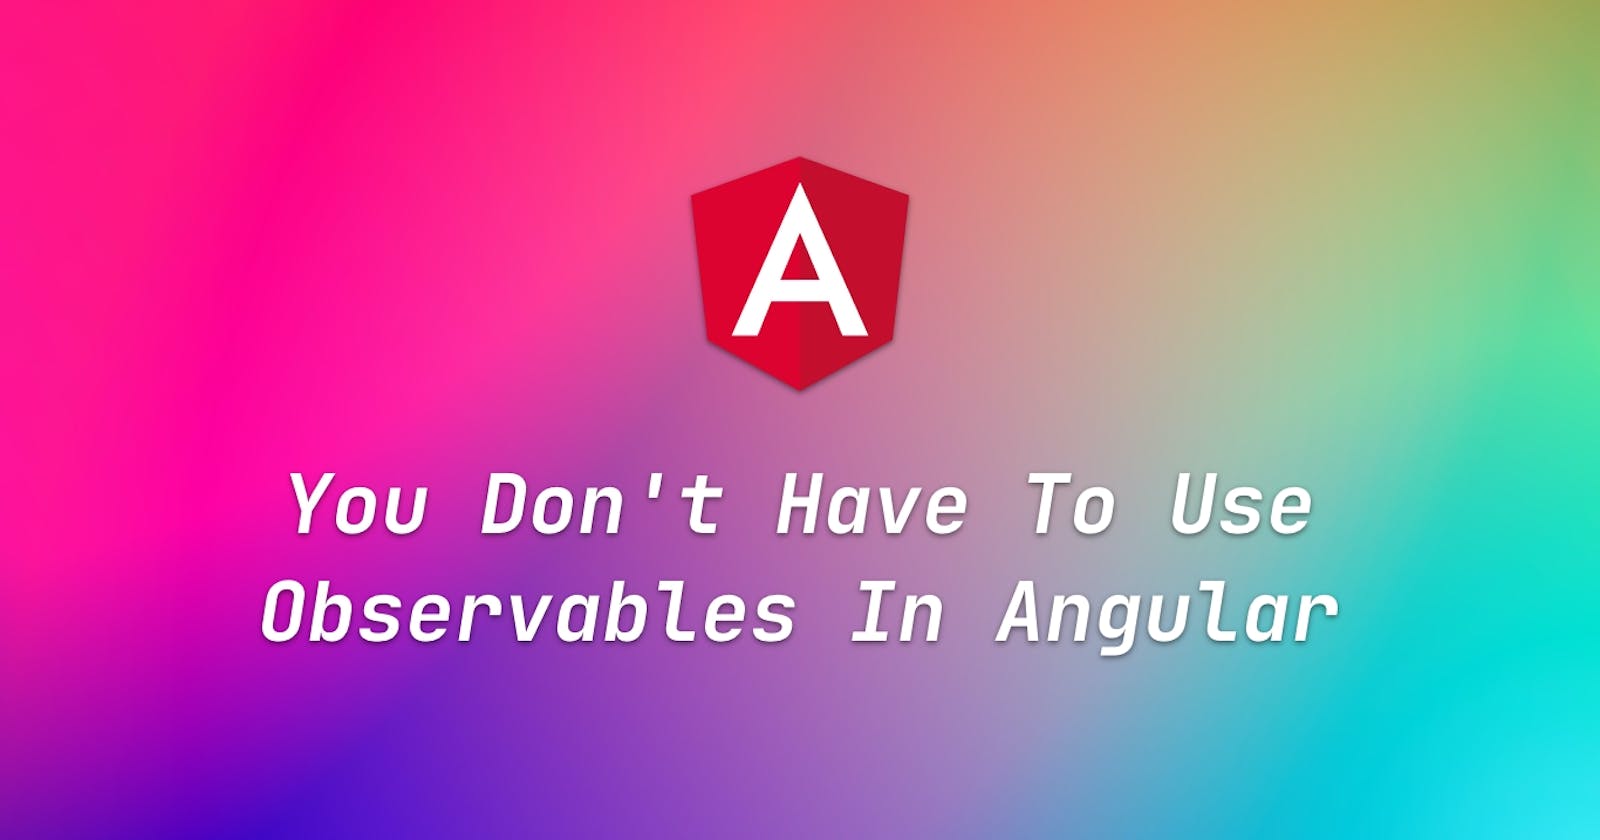 You Don't Have To Use Observables In Angular